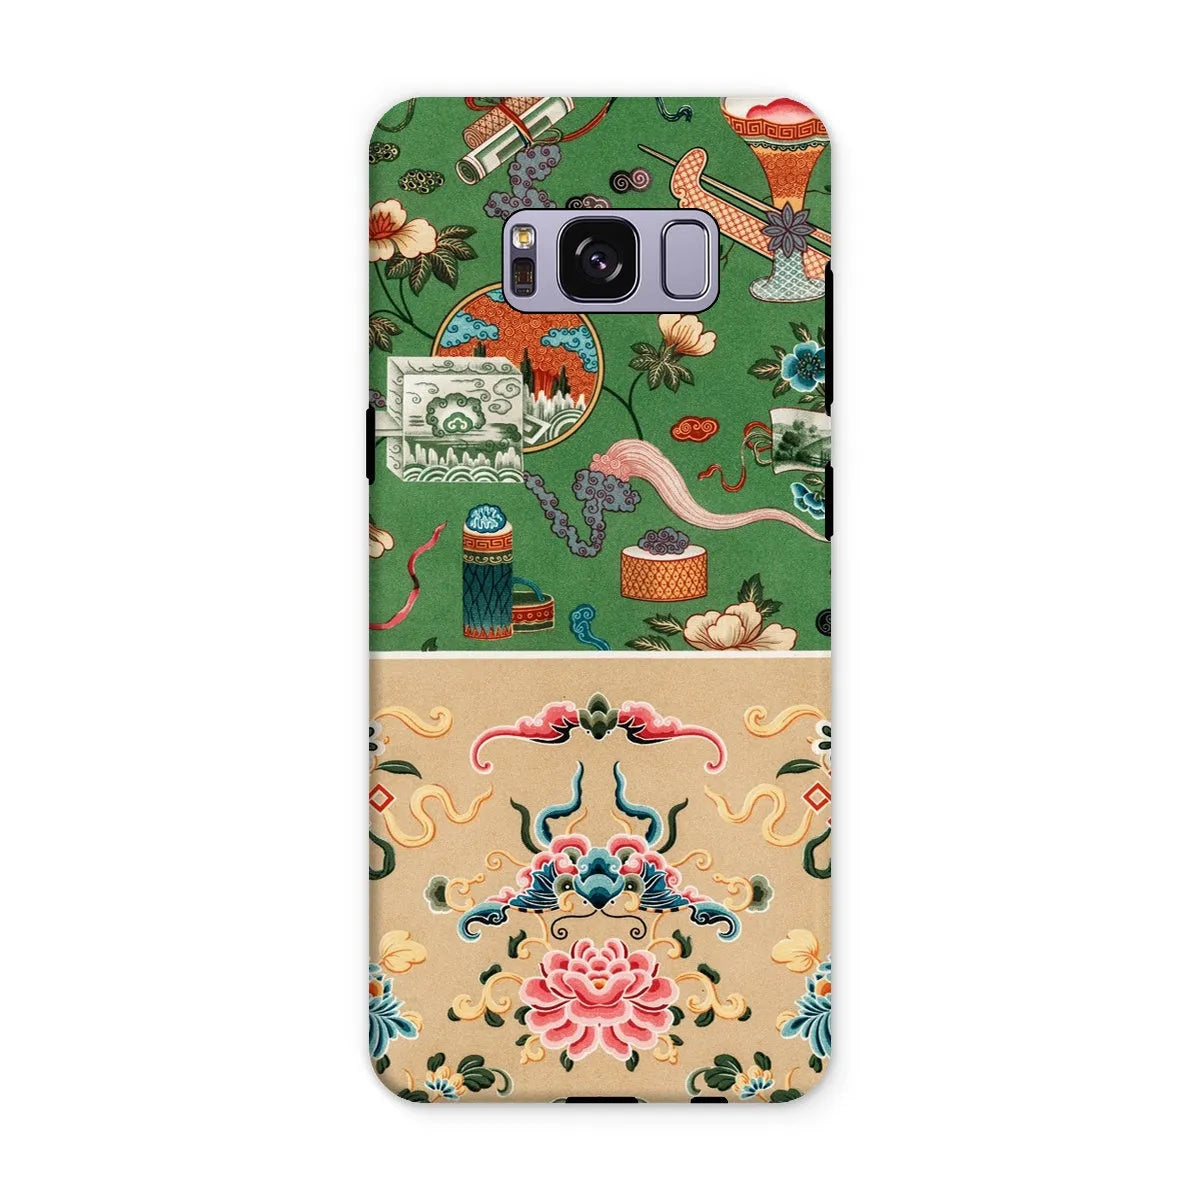 This Chinese Pattern By Auguste Racinet Tough Phone Case - Samsung Galaxy S8 Plus / Matte - Mobile Phone Cases